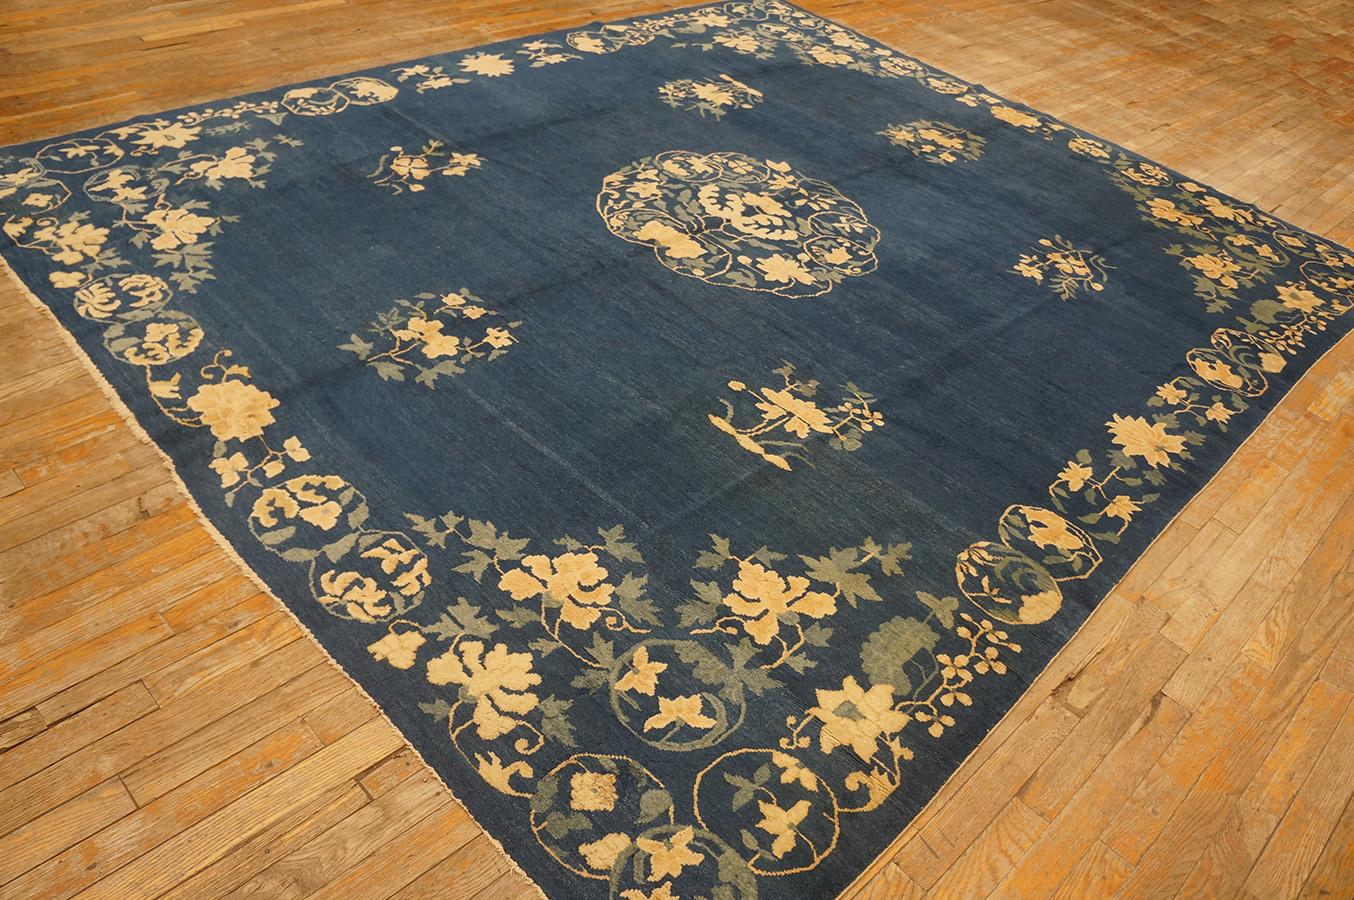 Antique Chinese Peking Rug 8' 0''x 9' 6'' For Sale 1